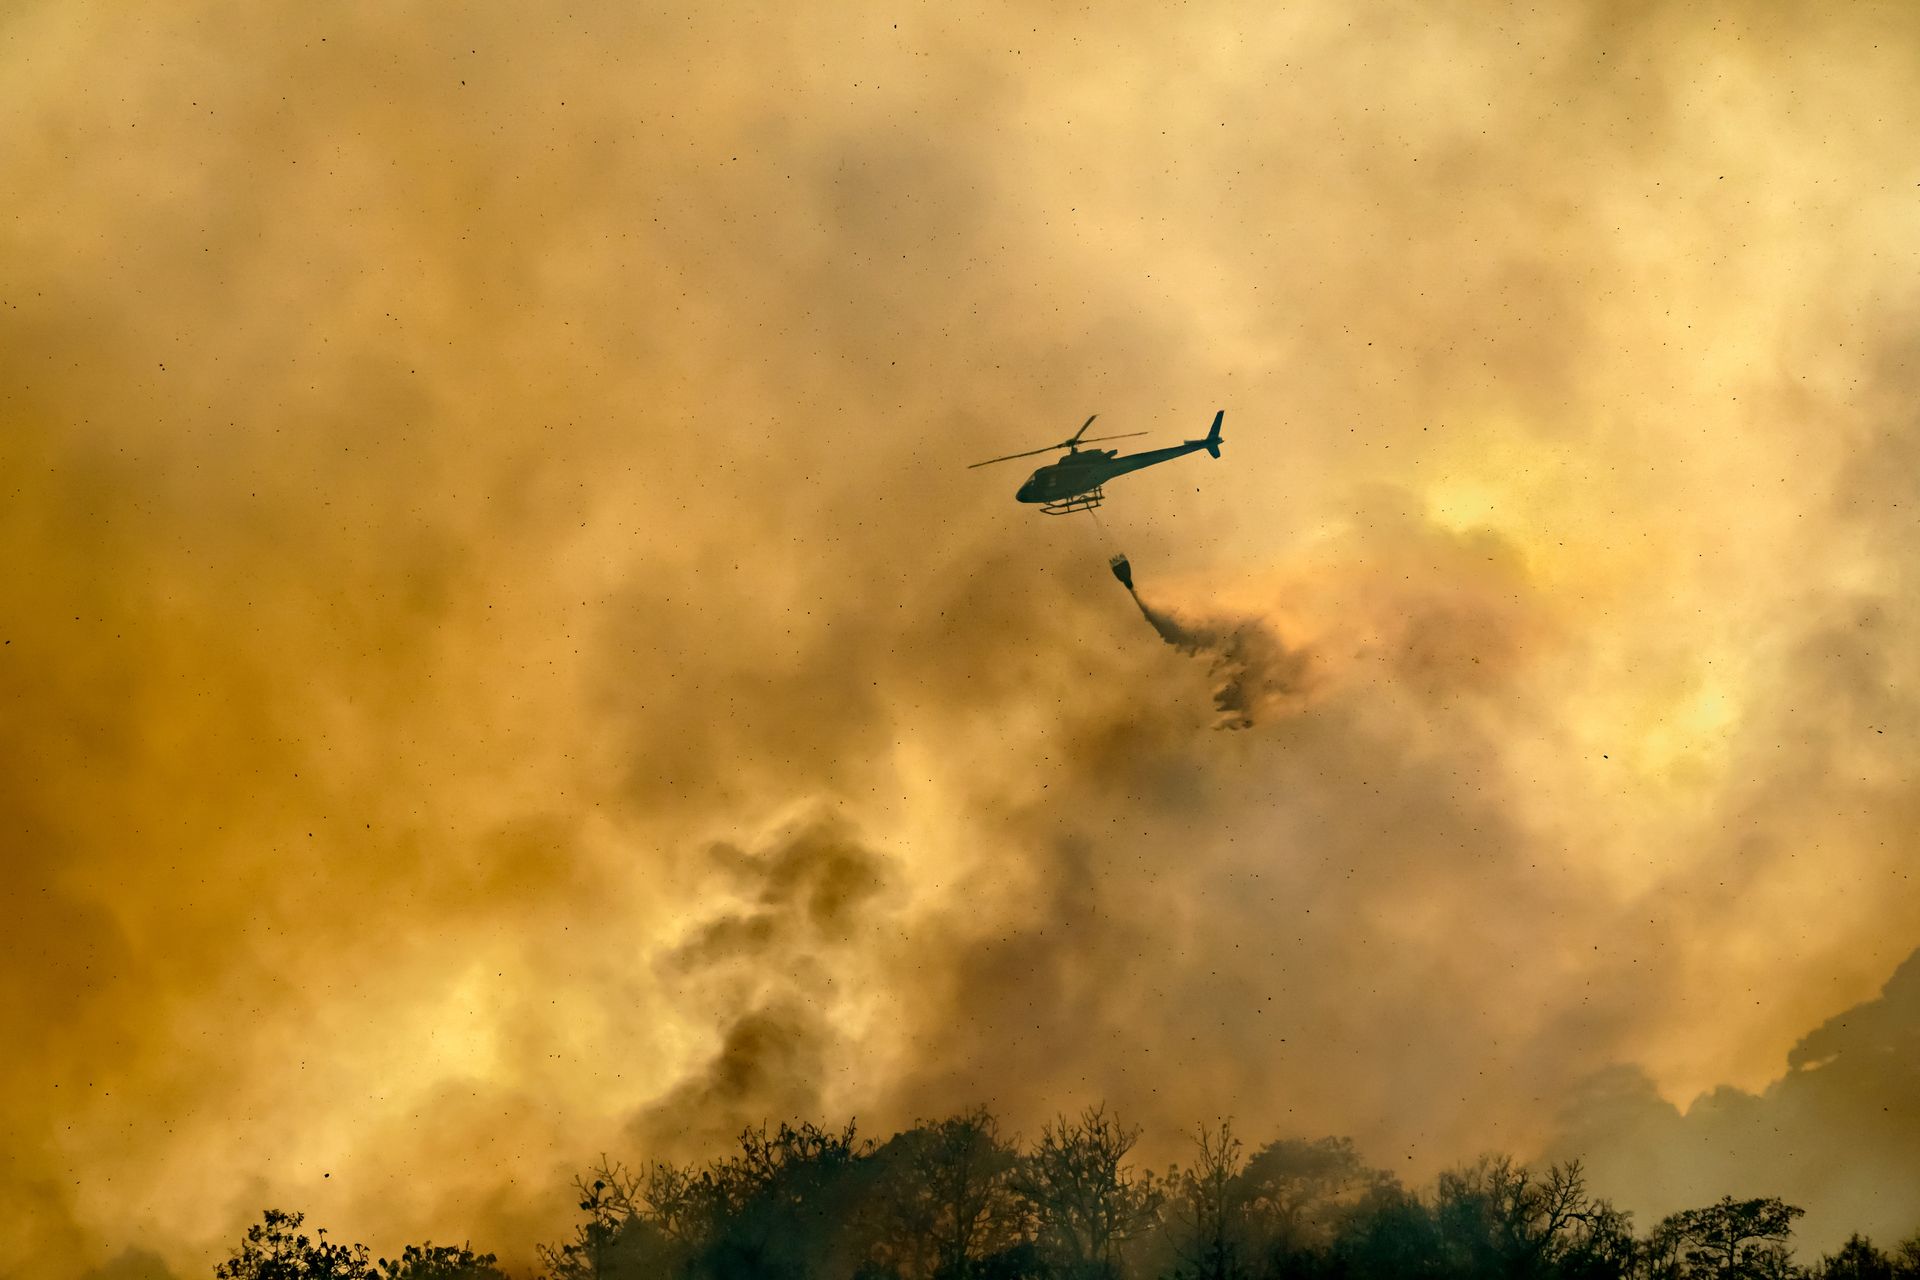 A helicopter hovers over a raging wildfire, releasing a burst of water that seems to fade into the towering smoke.